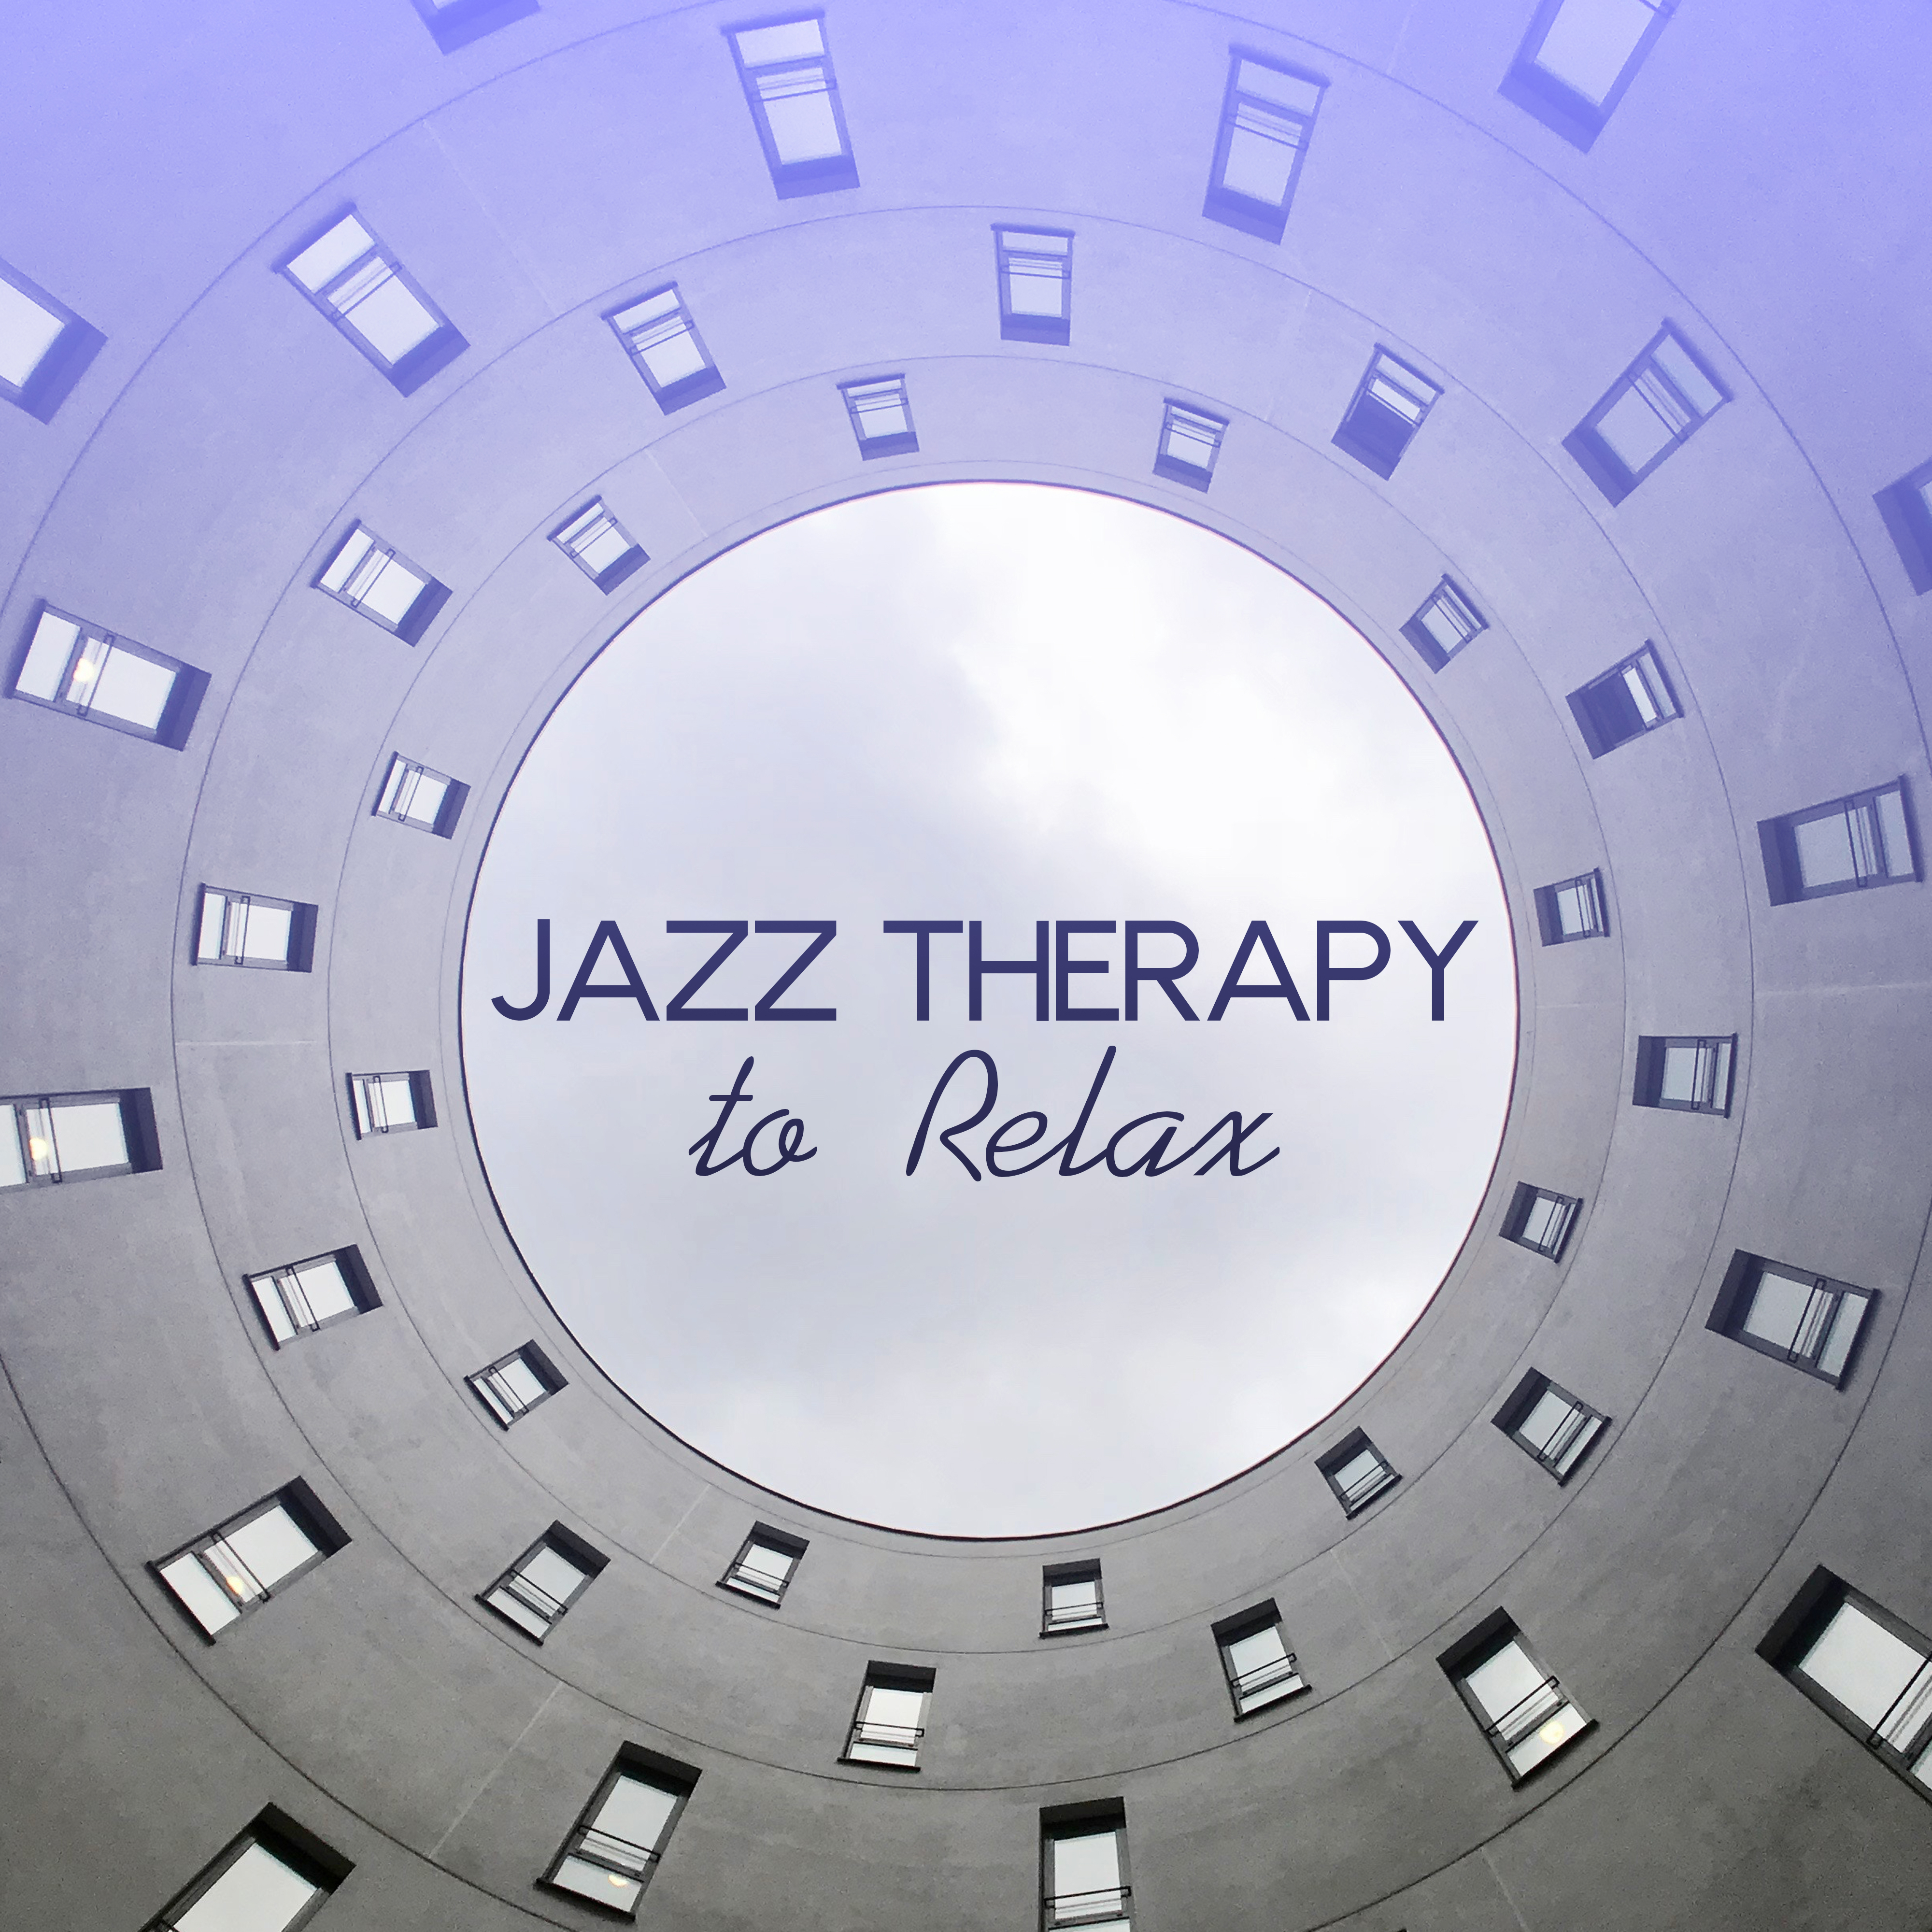 Jazz Therapy to Relax